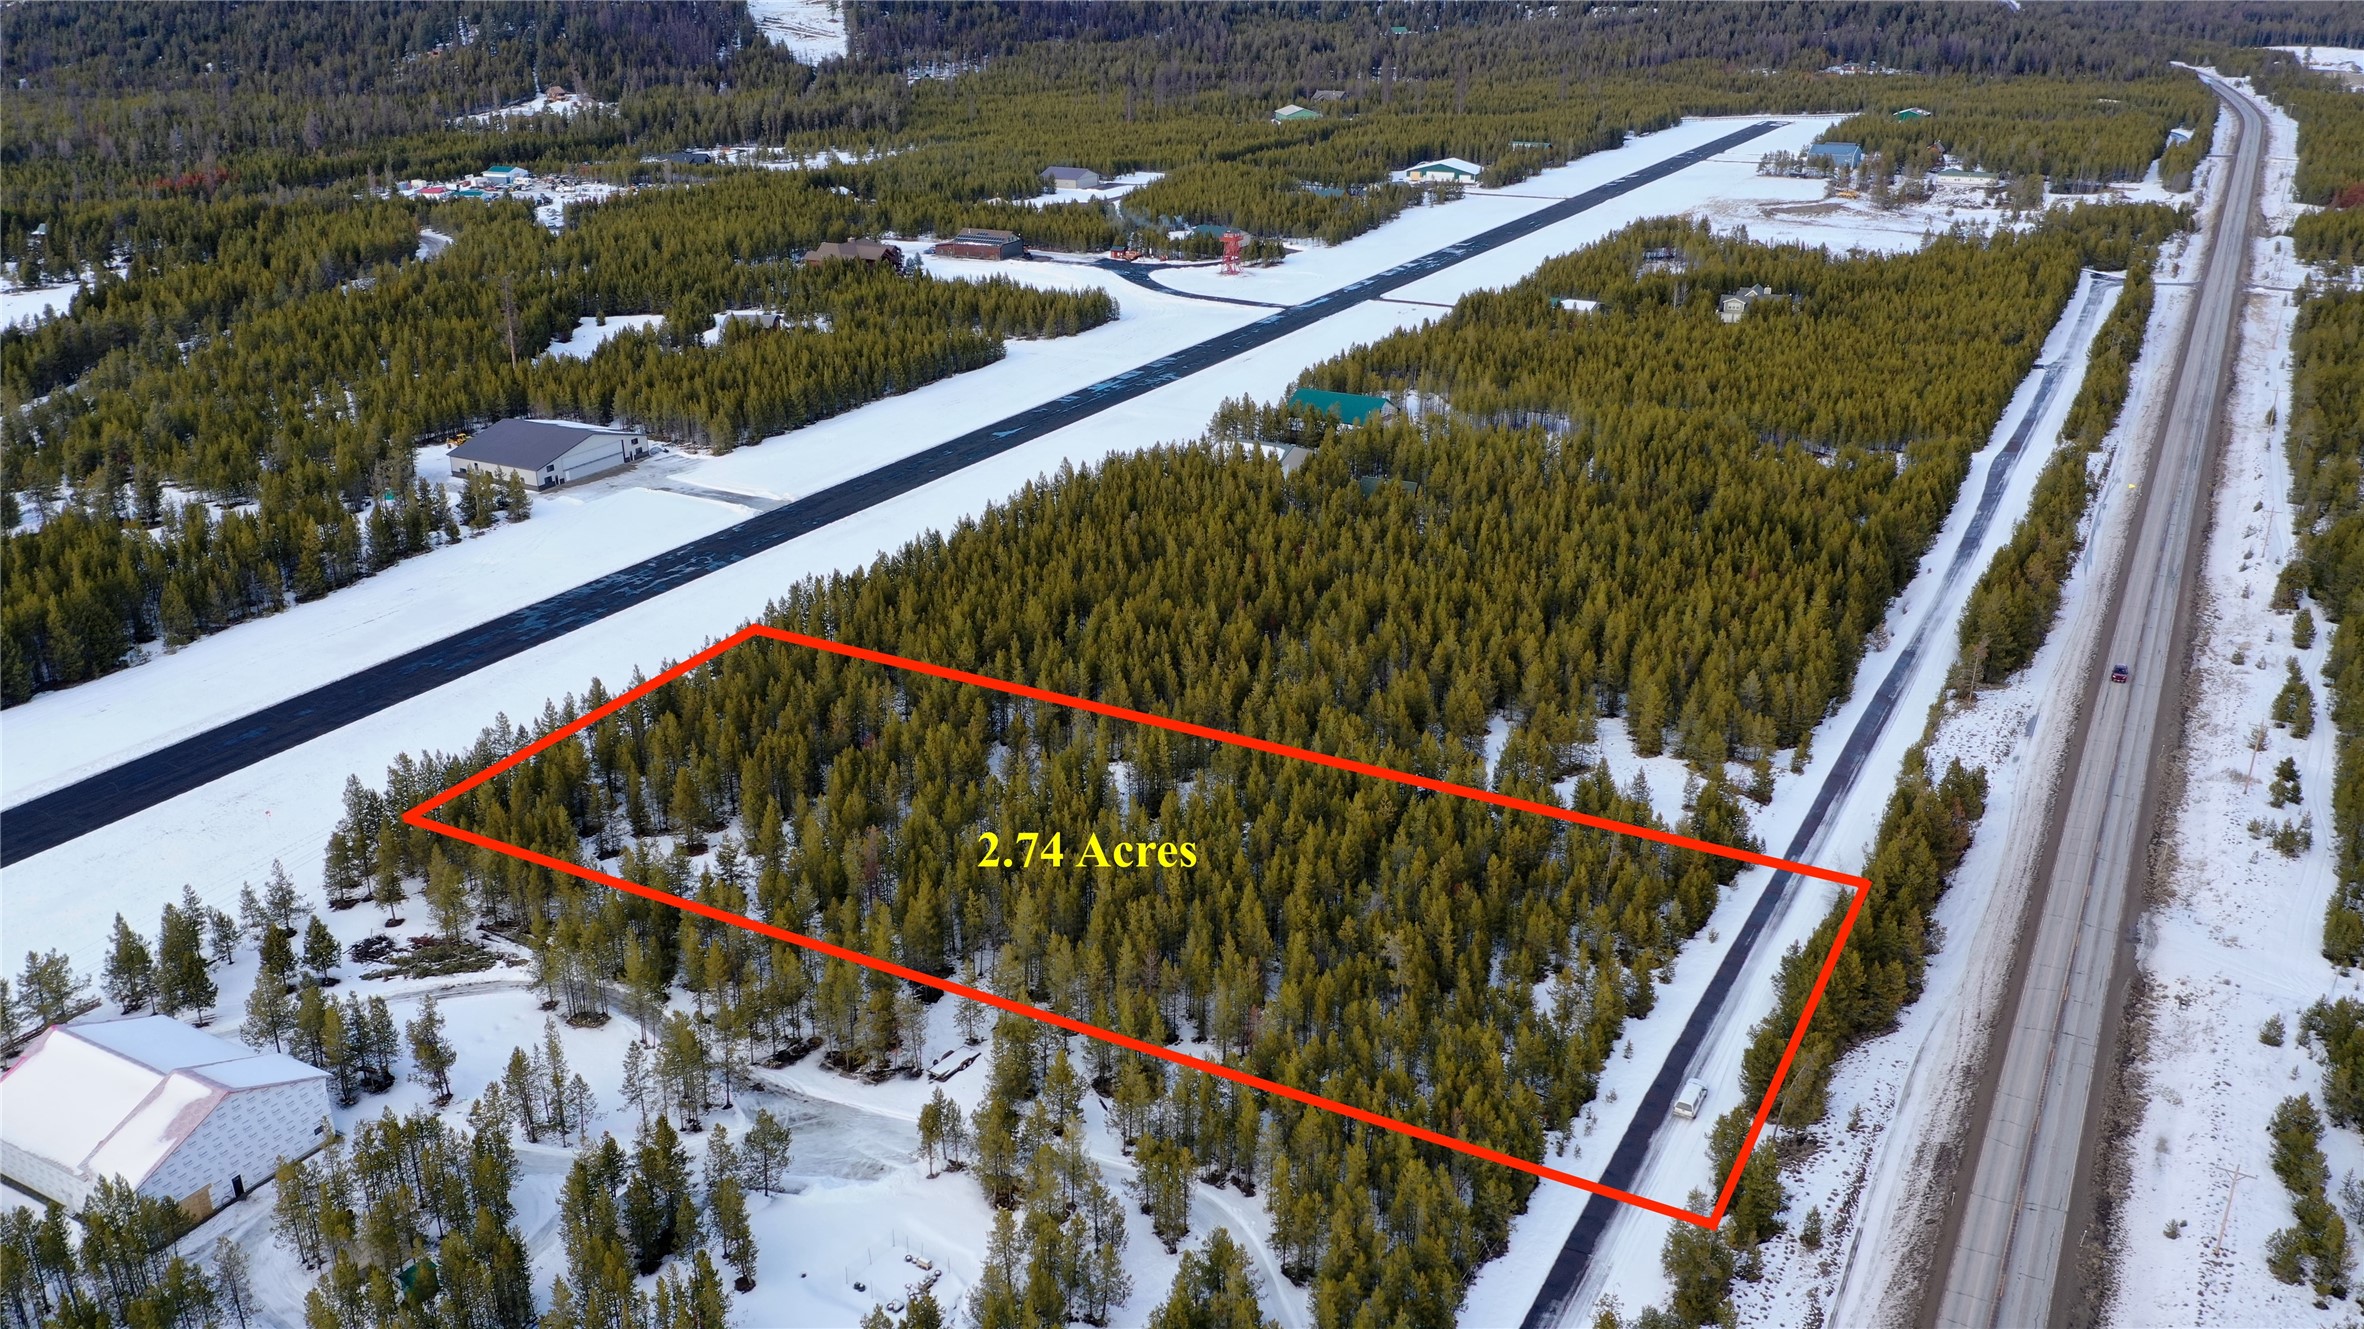 Pilots! 2.74 acre lot available in the well maintained Cabin Creek Landing Aviation Community located 30 minutes from Kalispell, MT. Build your home and hangar and enjoy the freedom of taking off and landing right out of your front door. Electricity is at the lot line as well as phone hook up. The paved runway is 3400' long with pilot-controlled lighting. There is a beautiful model tower and an additional homeowner parking area with tie downs for your guests. The 4.5-acre homeowners park sits along the Little Bitterroot River. This property is minutes from Bitterroot Lake, Mcgregor Lake and many rivers. Airport Identifier 97MT. Call Jake Berry 406-261-5095 or your Real Estate Professional.